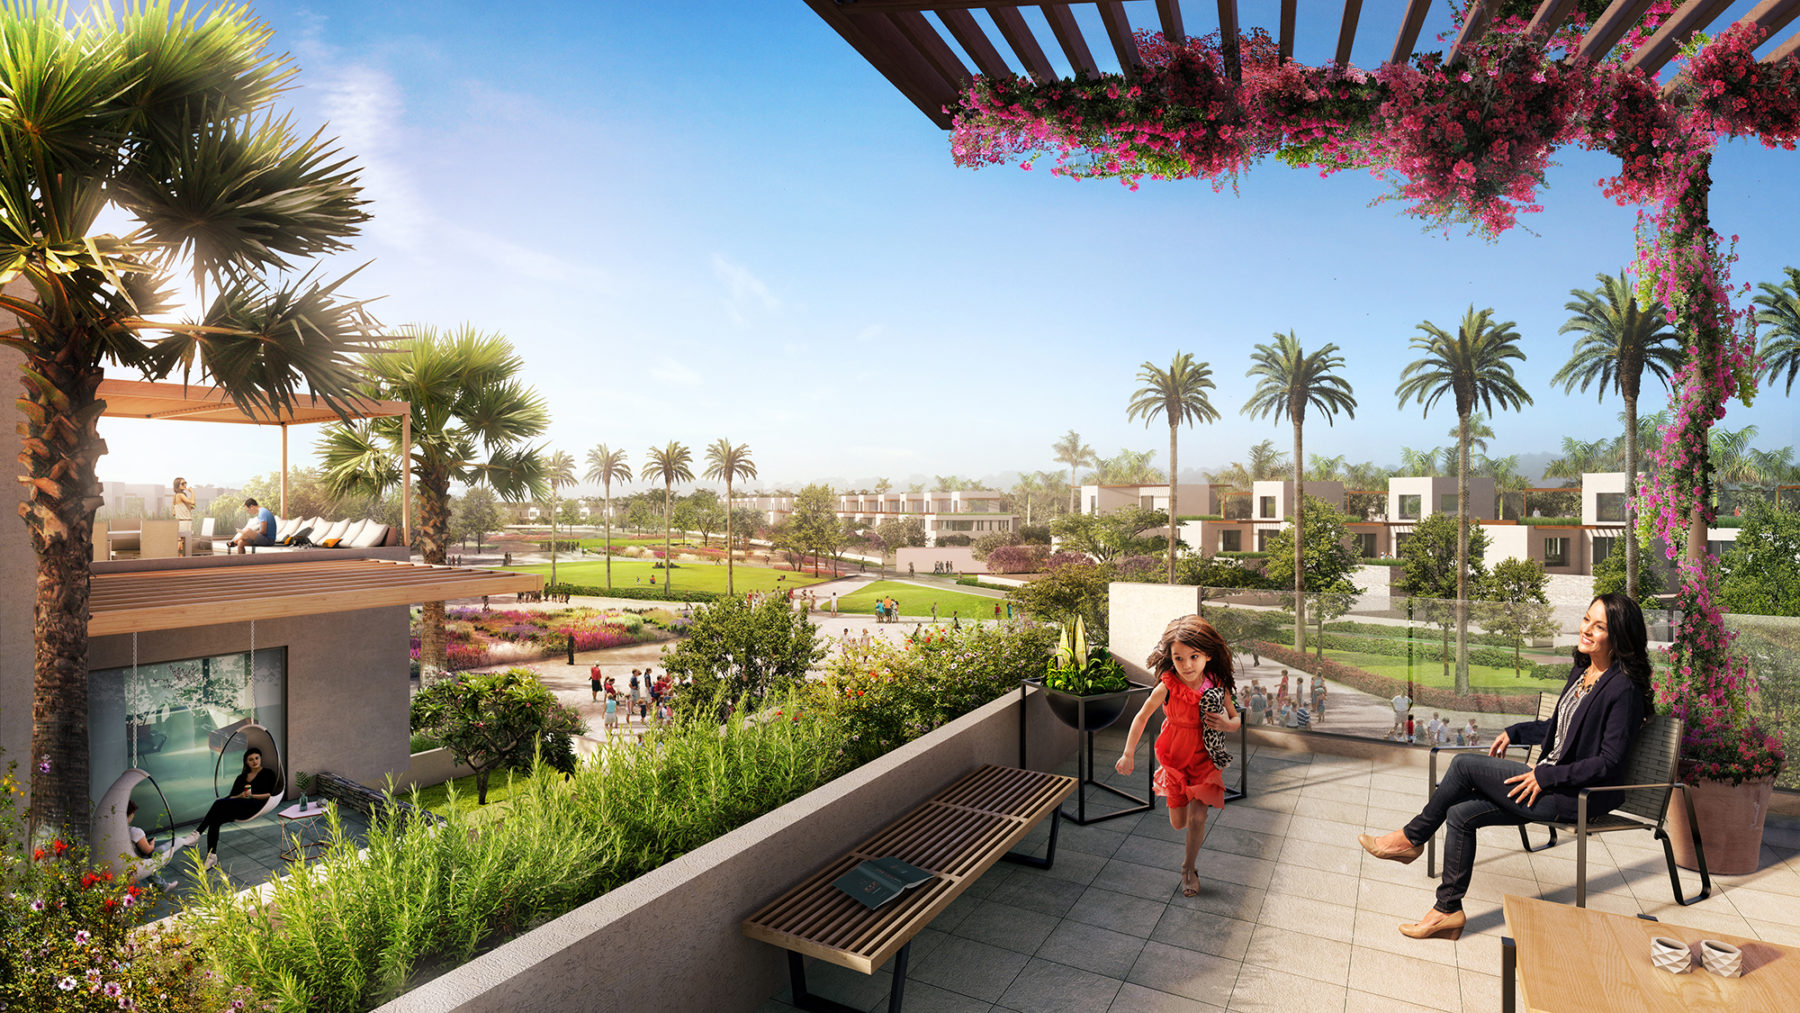 perspective rendering on balcony, showing mixed-use community